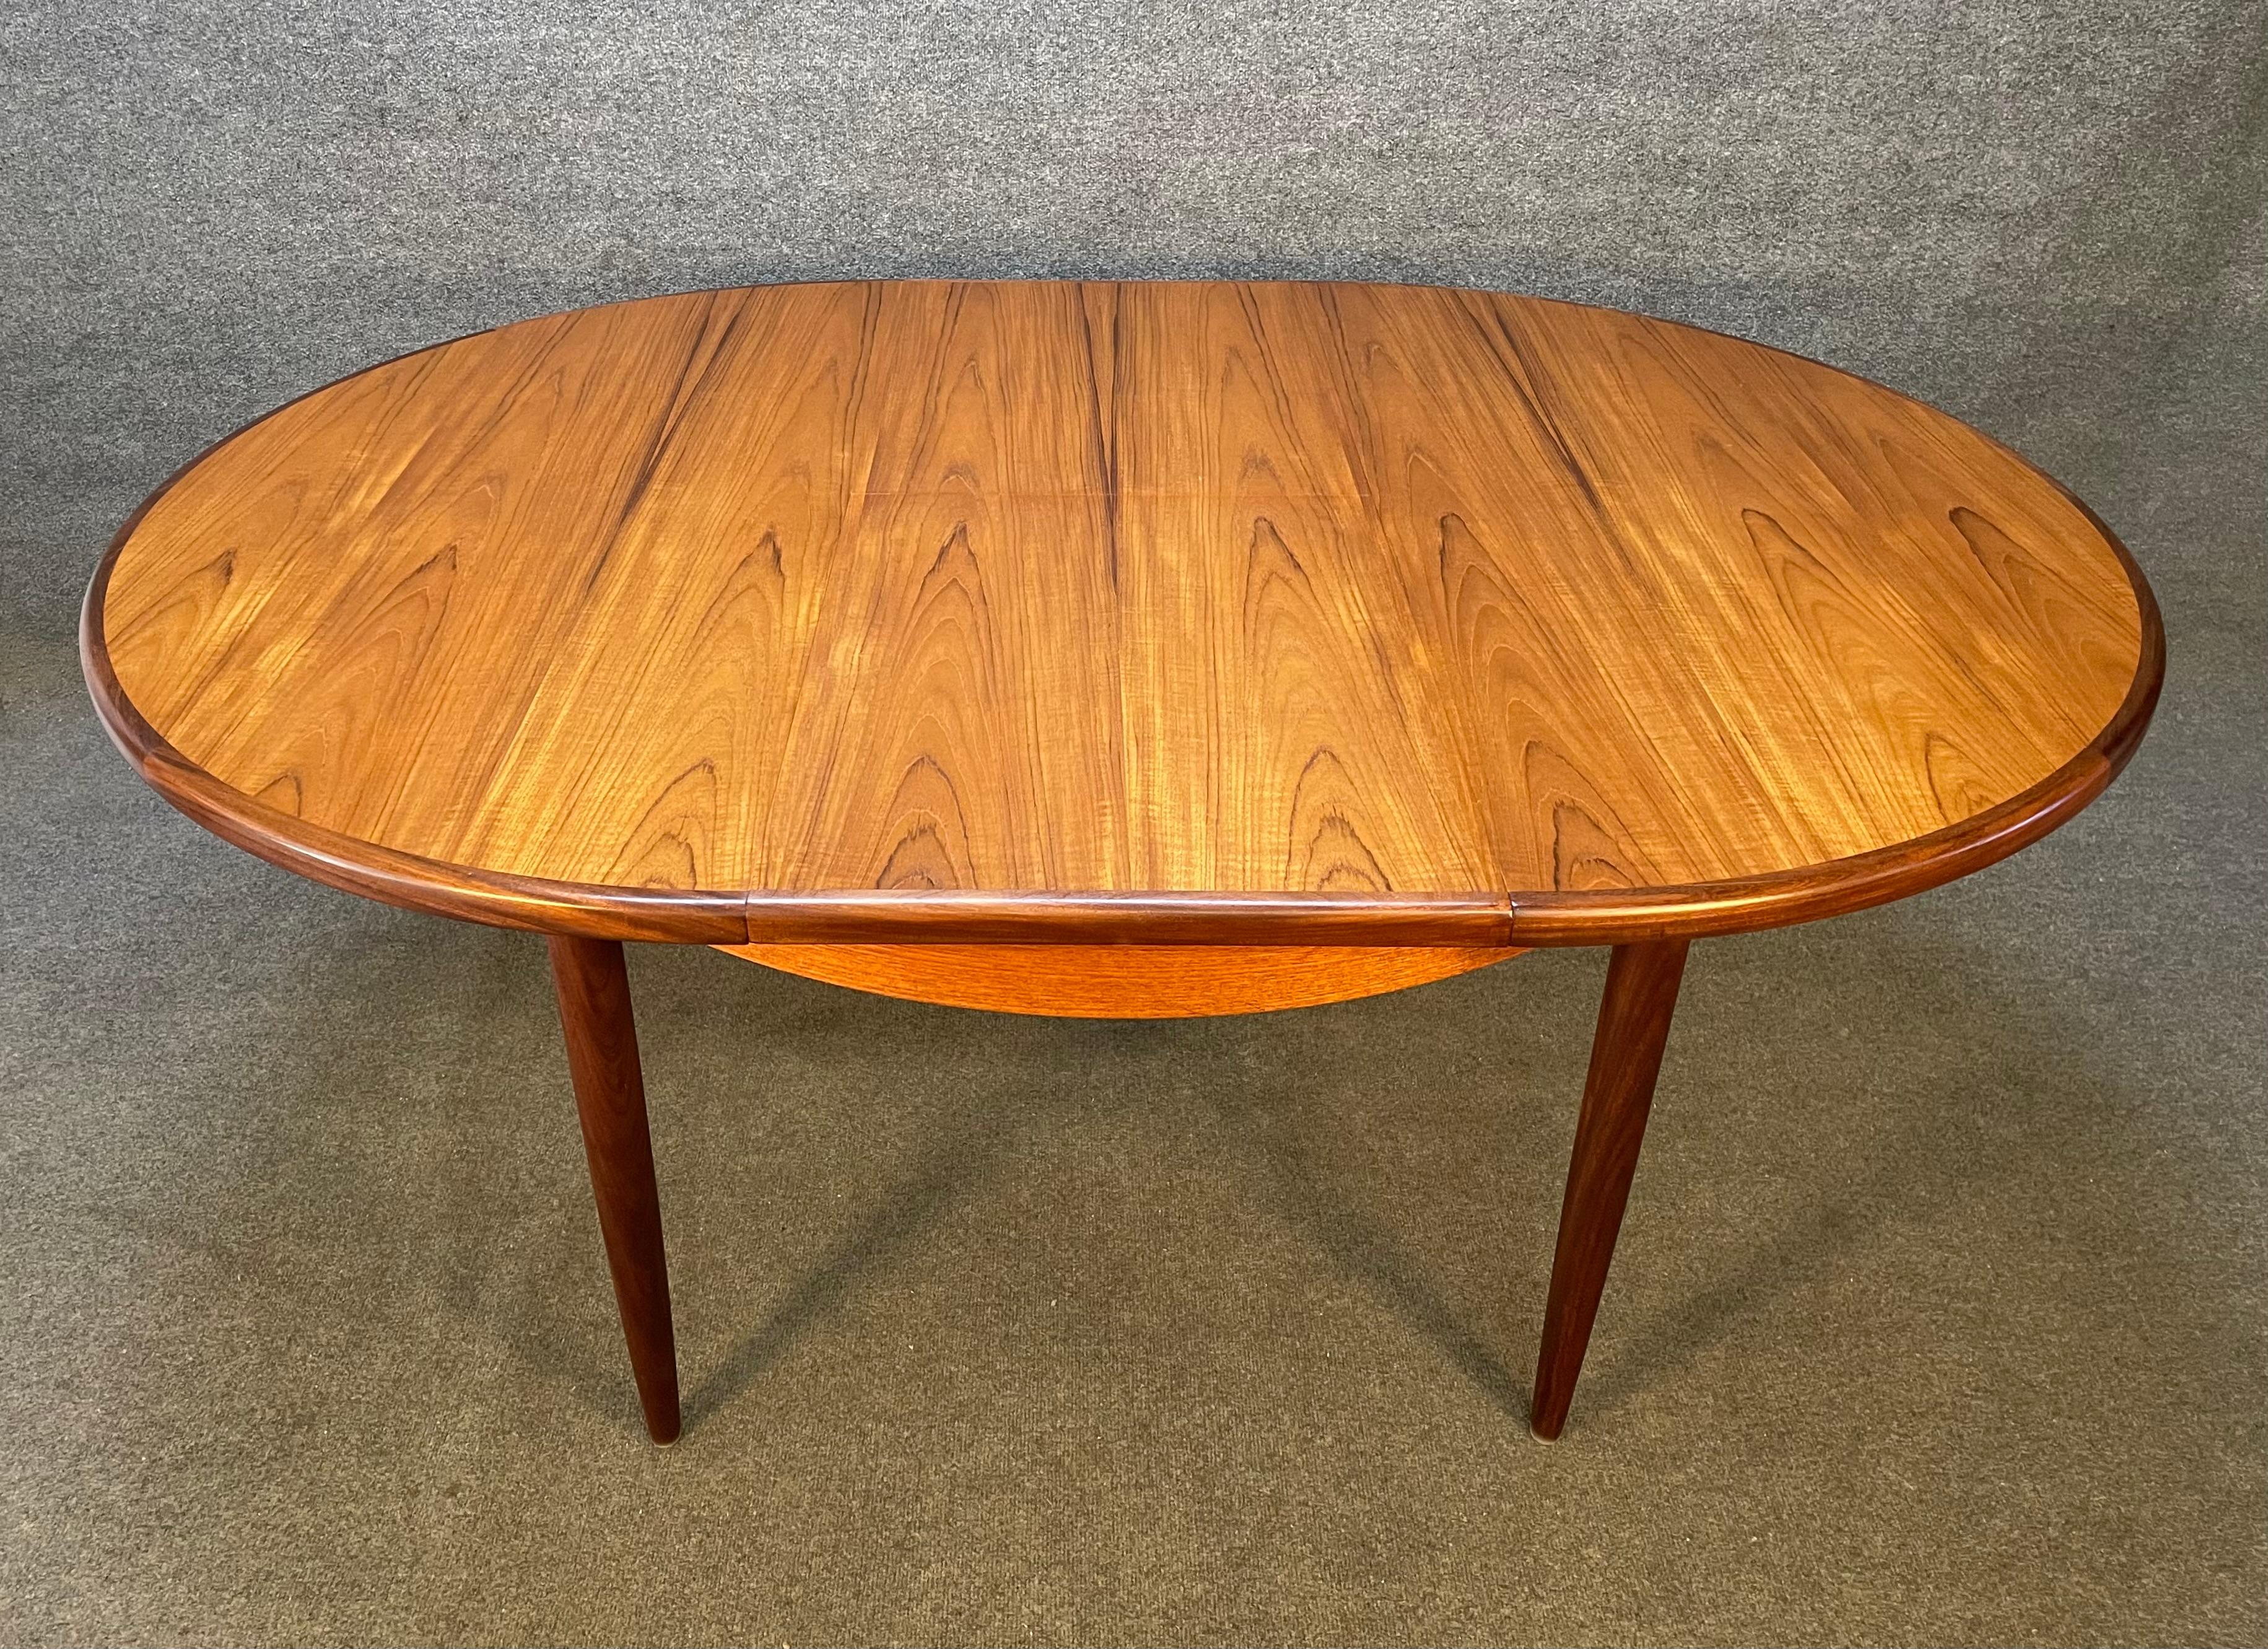 Here is a beautiful British Mid-Century Modern round dining table in teak designed by Victor Wilkins for the 